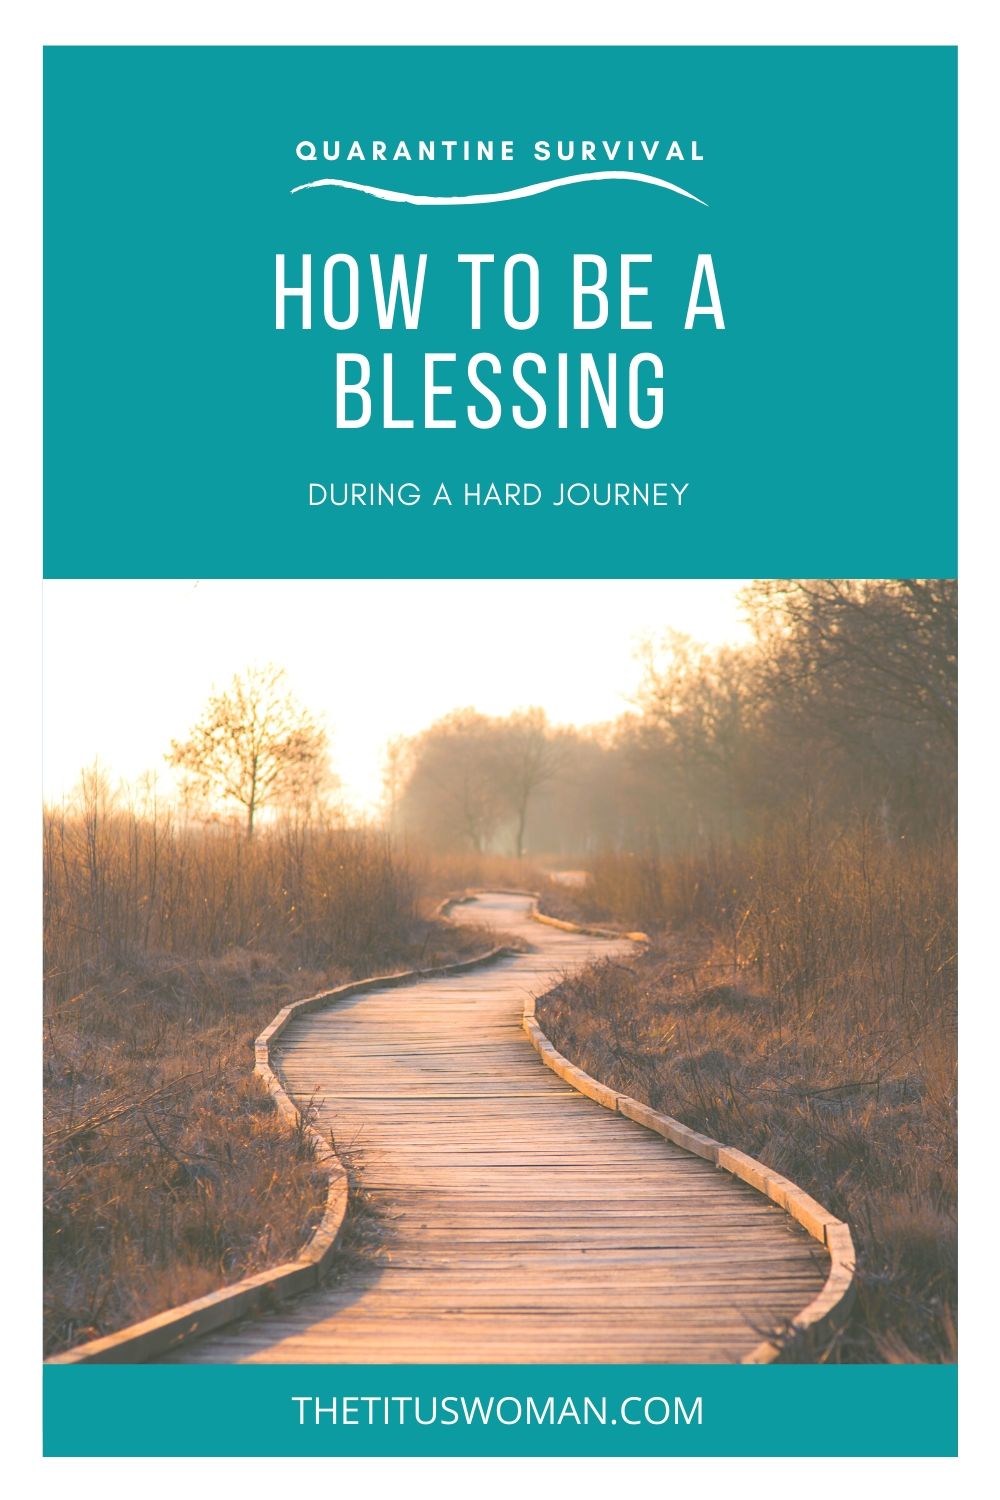 HOW TO BE A BLESSING DURING A HARD JOURNEY